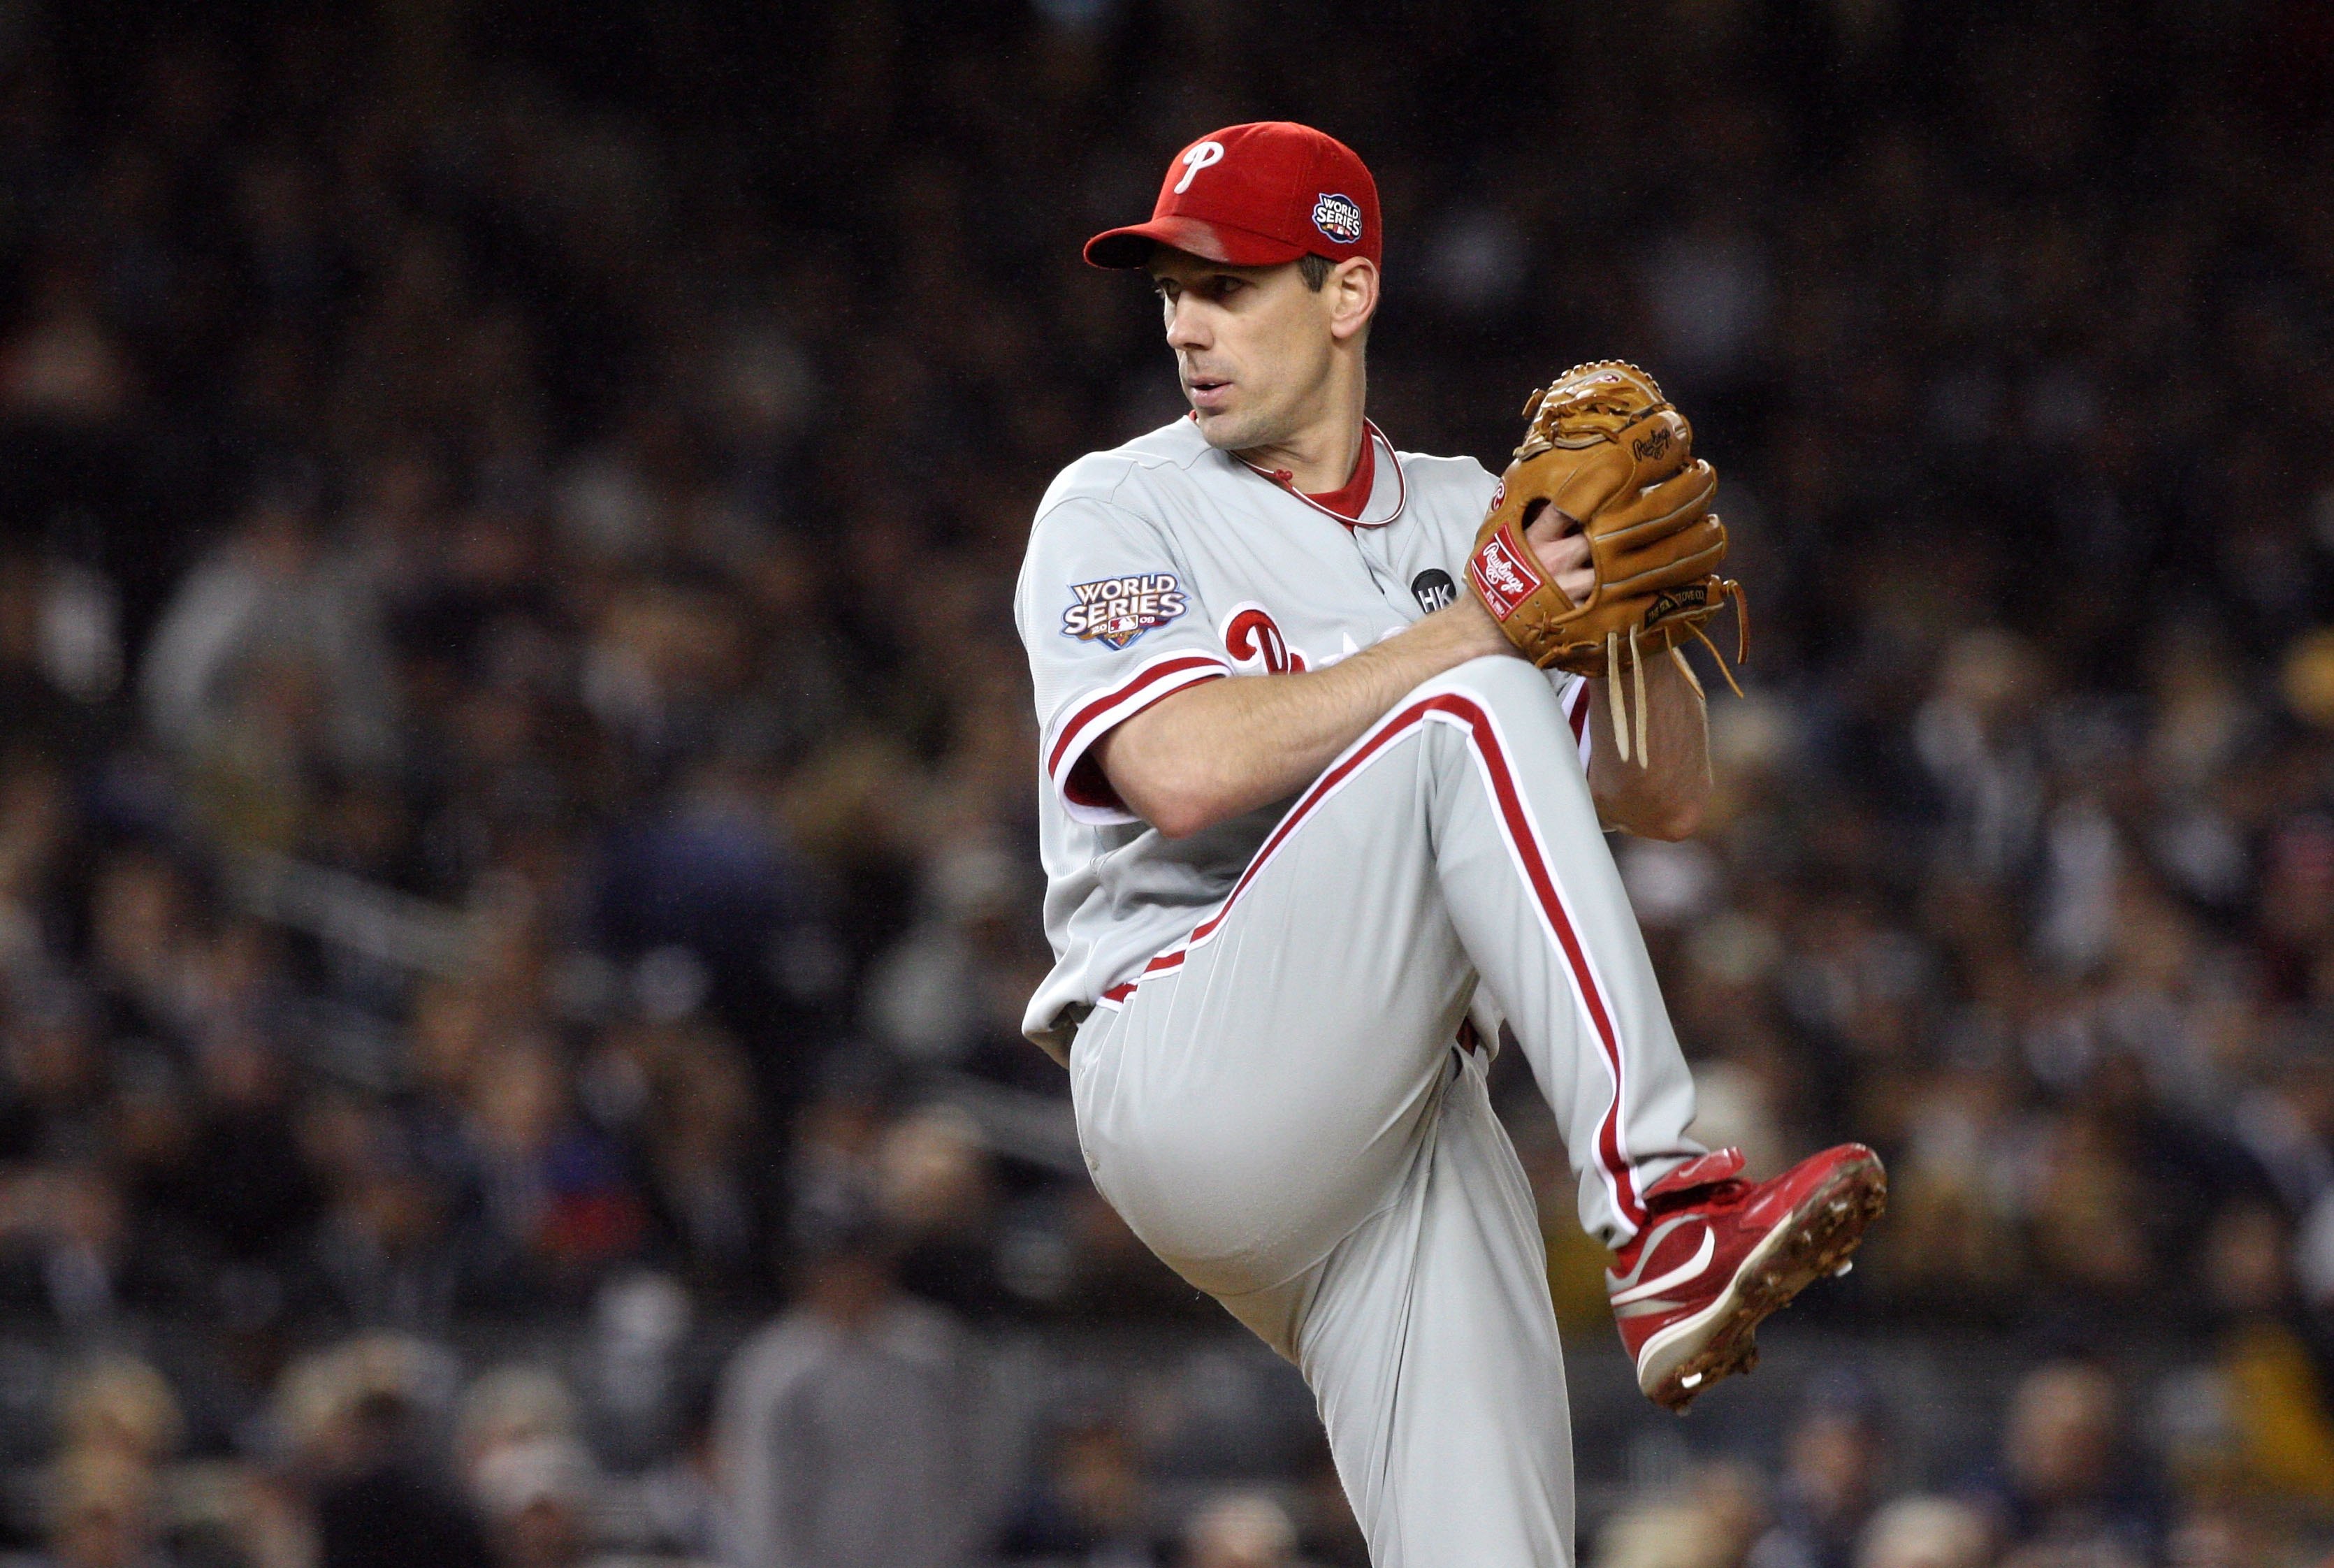 Cliff Lee: 10 Reasons He'll Never Live Up To His New Big-Money